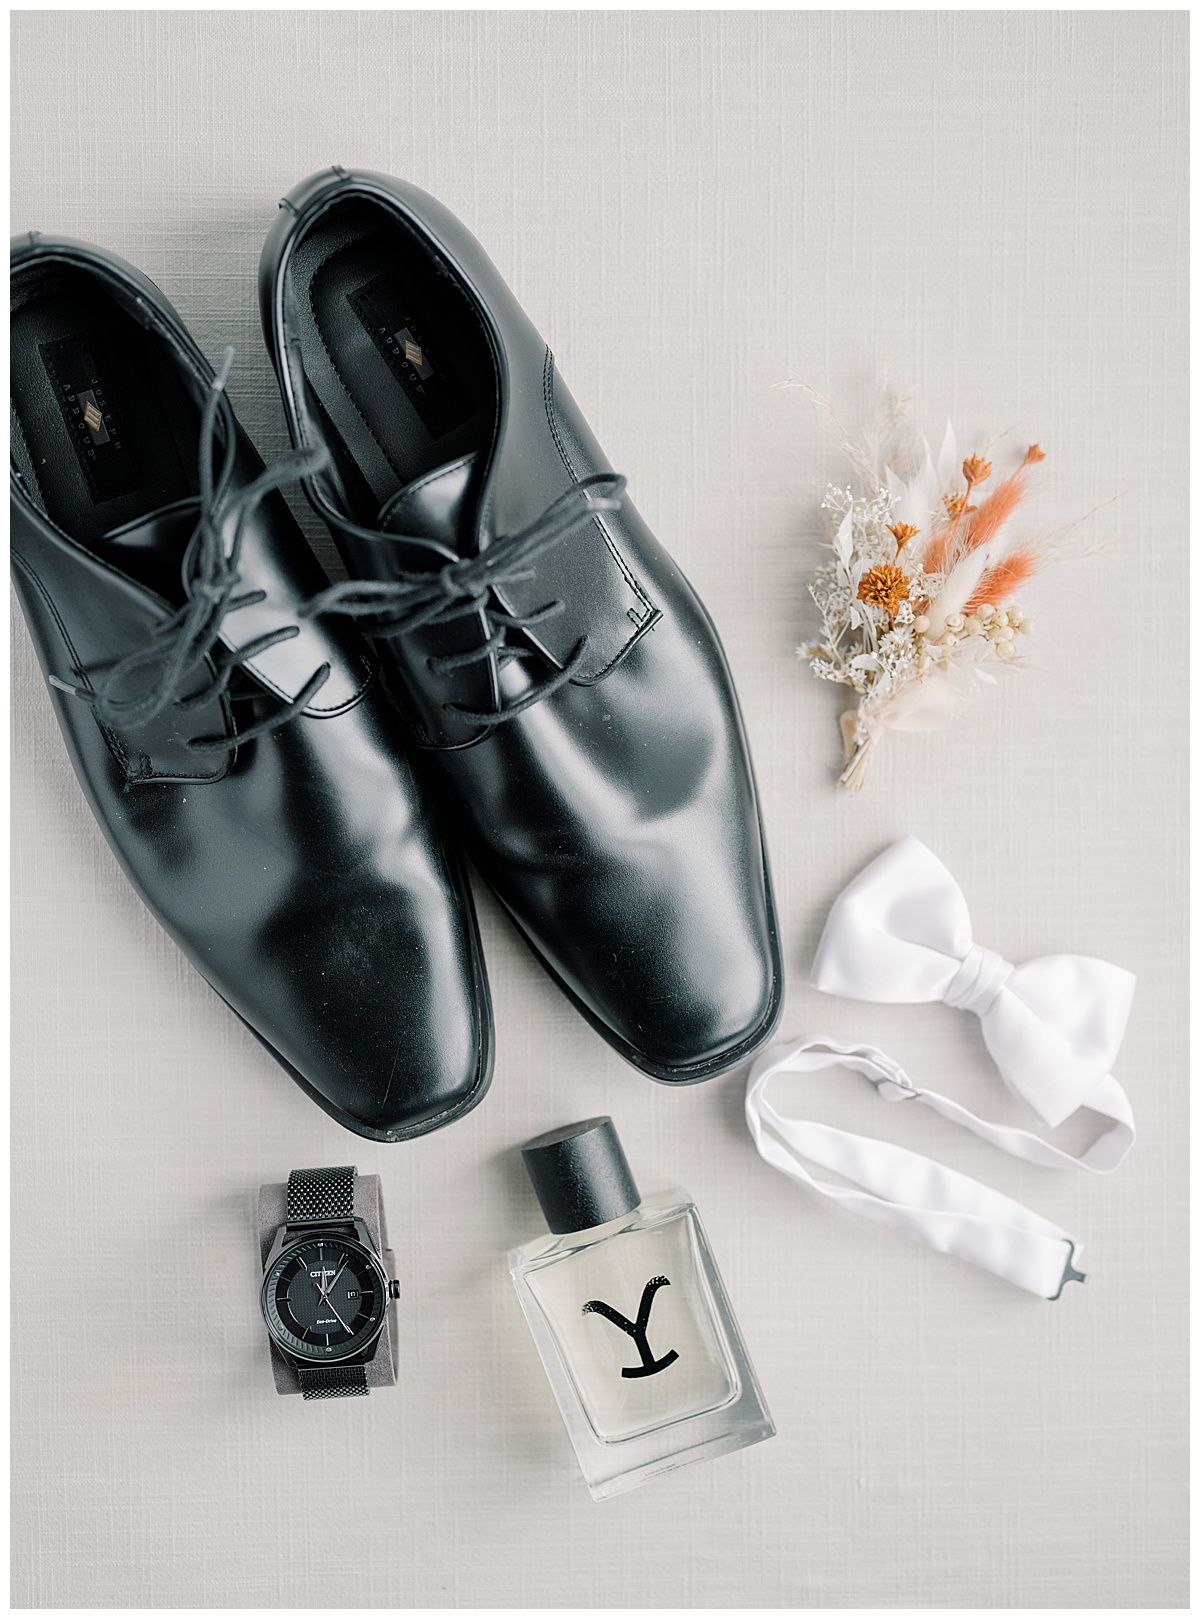 Black tuxedo shoes and groom details on wedding day. 